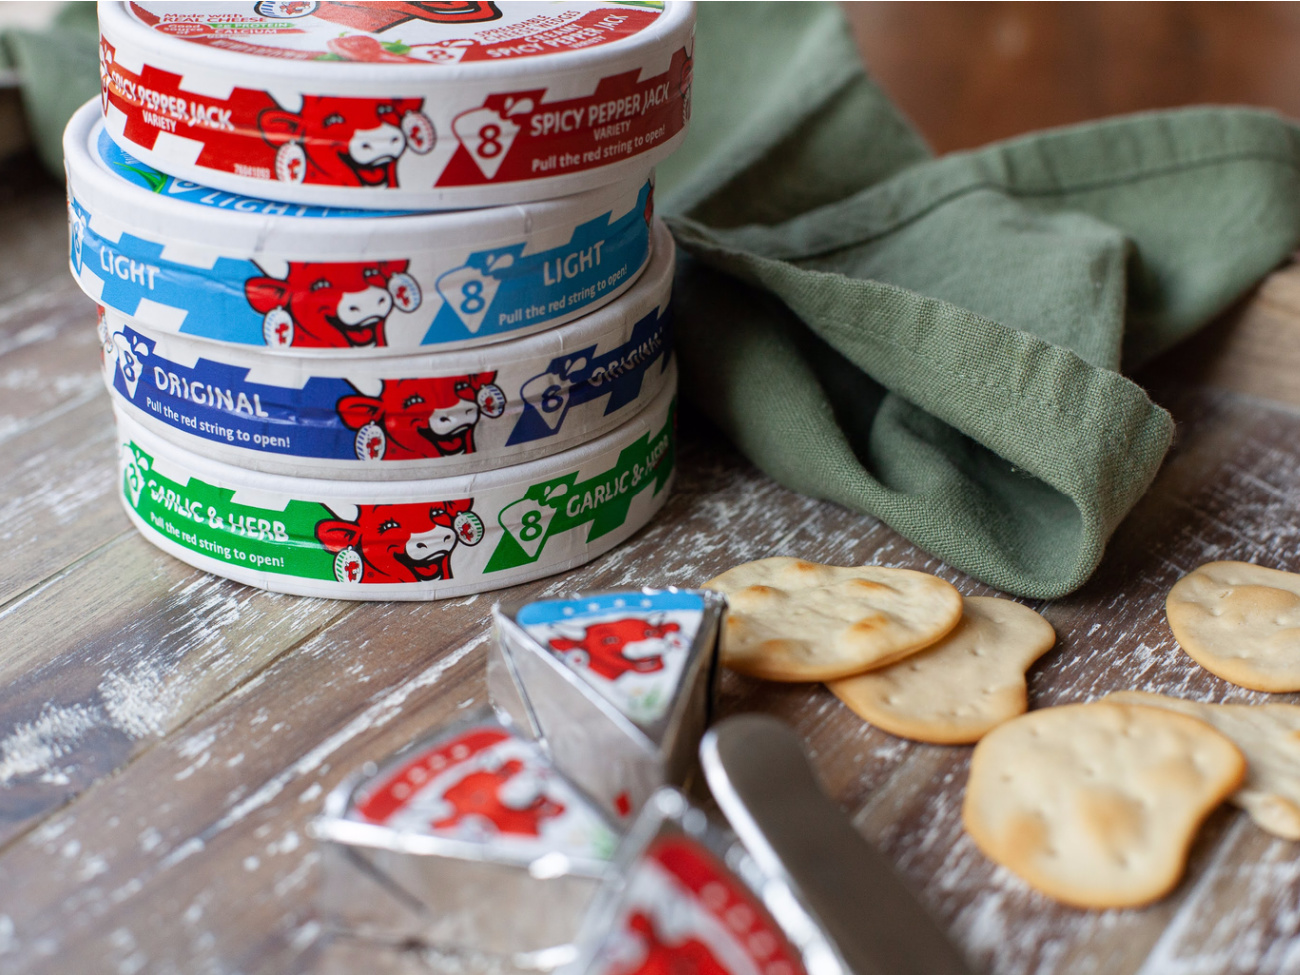 The Laughing Cow Cheese Is Just $1.99 At Kroger